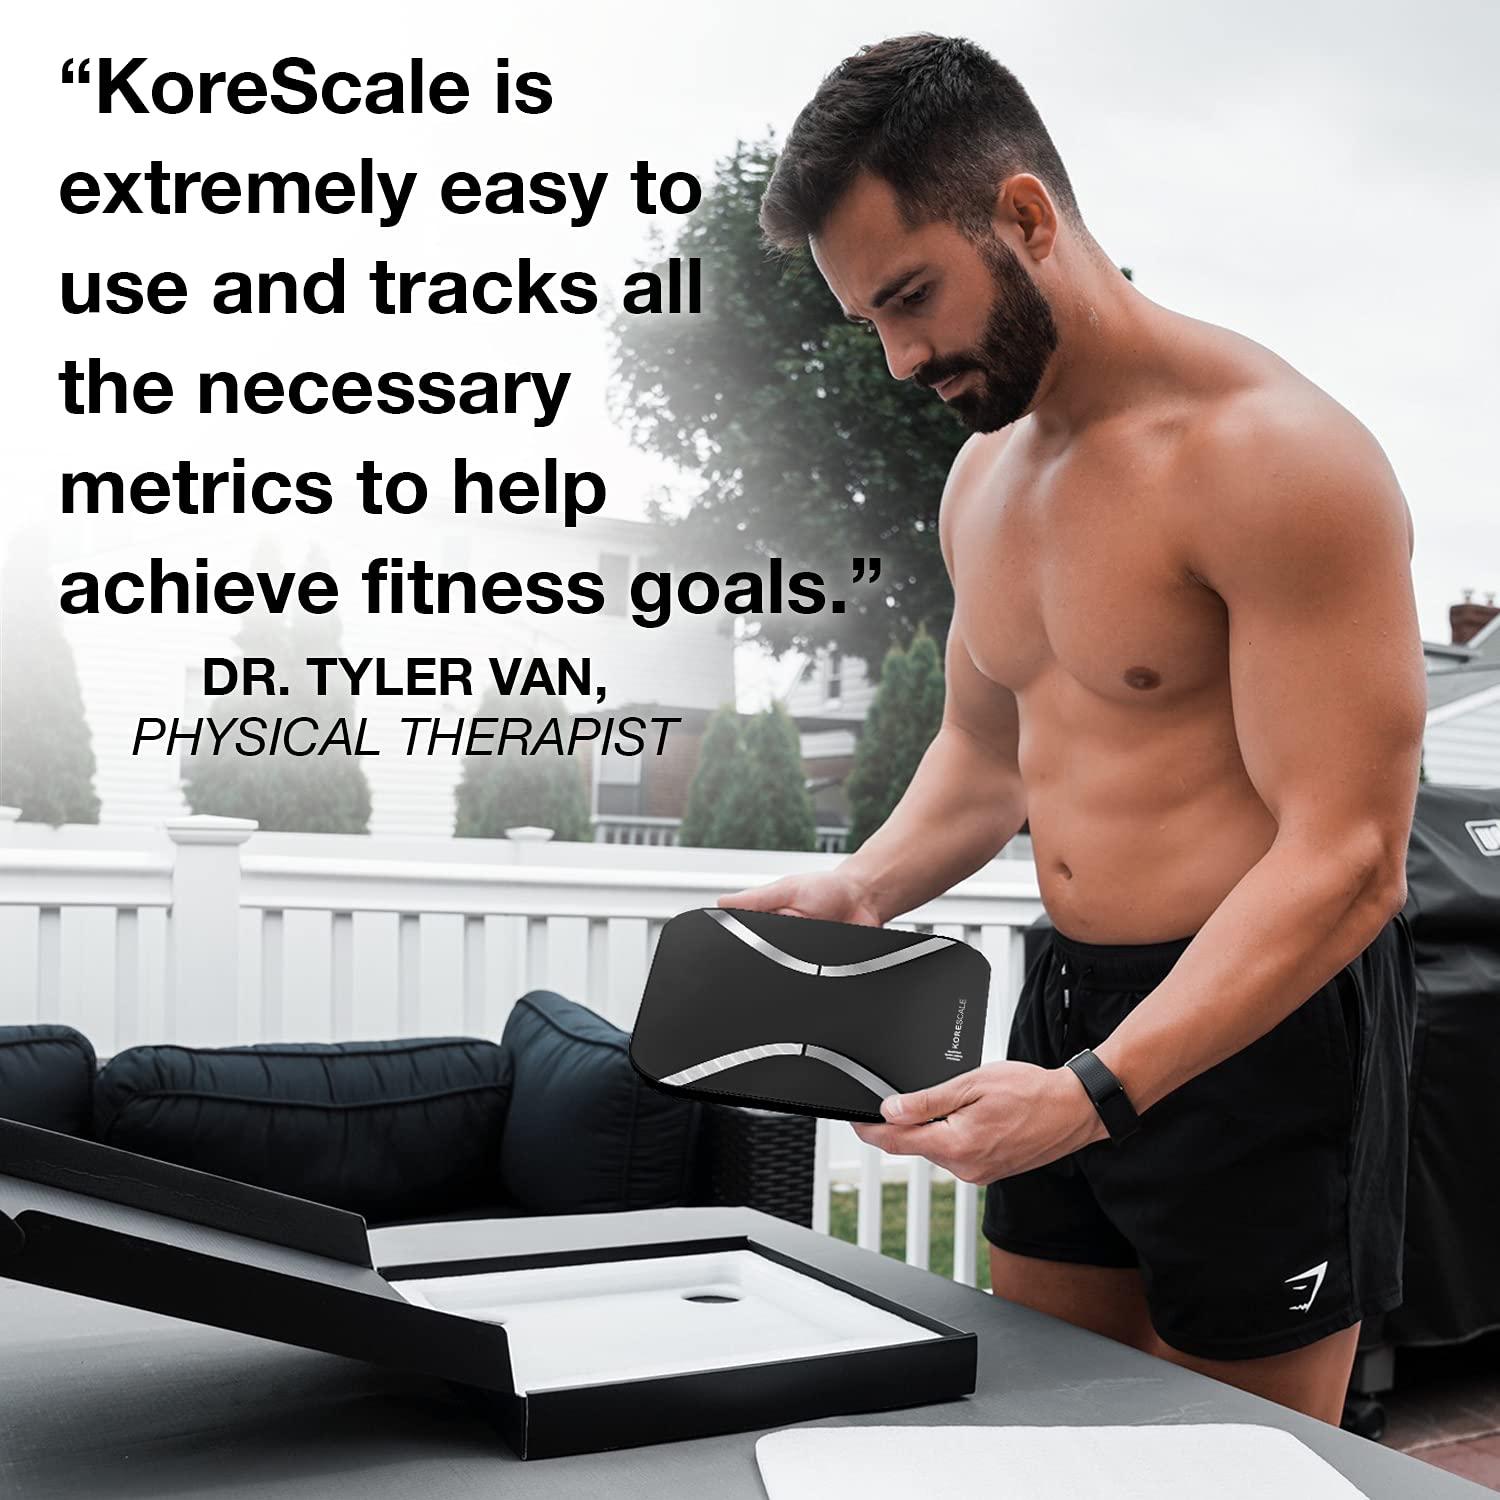 KOREHEALTH Korescale G2 - Smart Scale for Body Weight, Home Bathroom Scale  Tracks BMI, Muscle Mass, Body Liquids and More, Weight Scale with  Bluetooth App